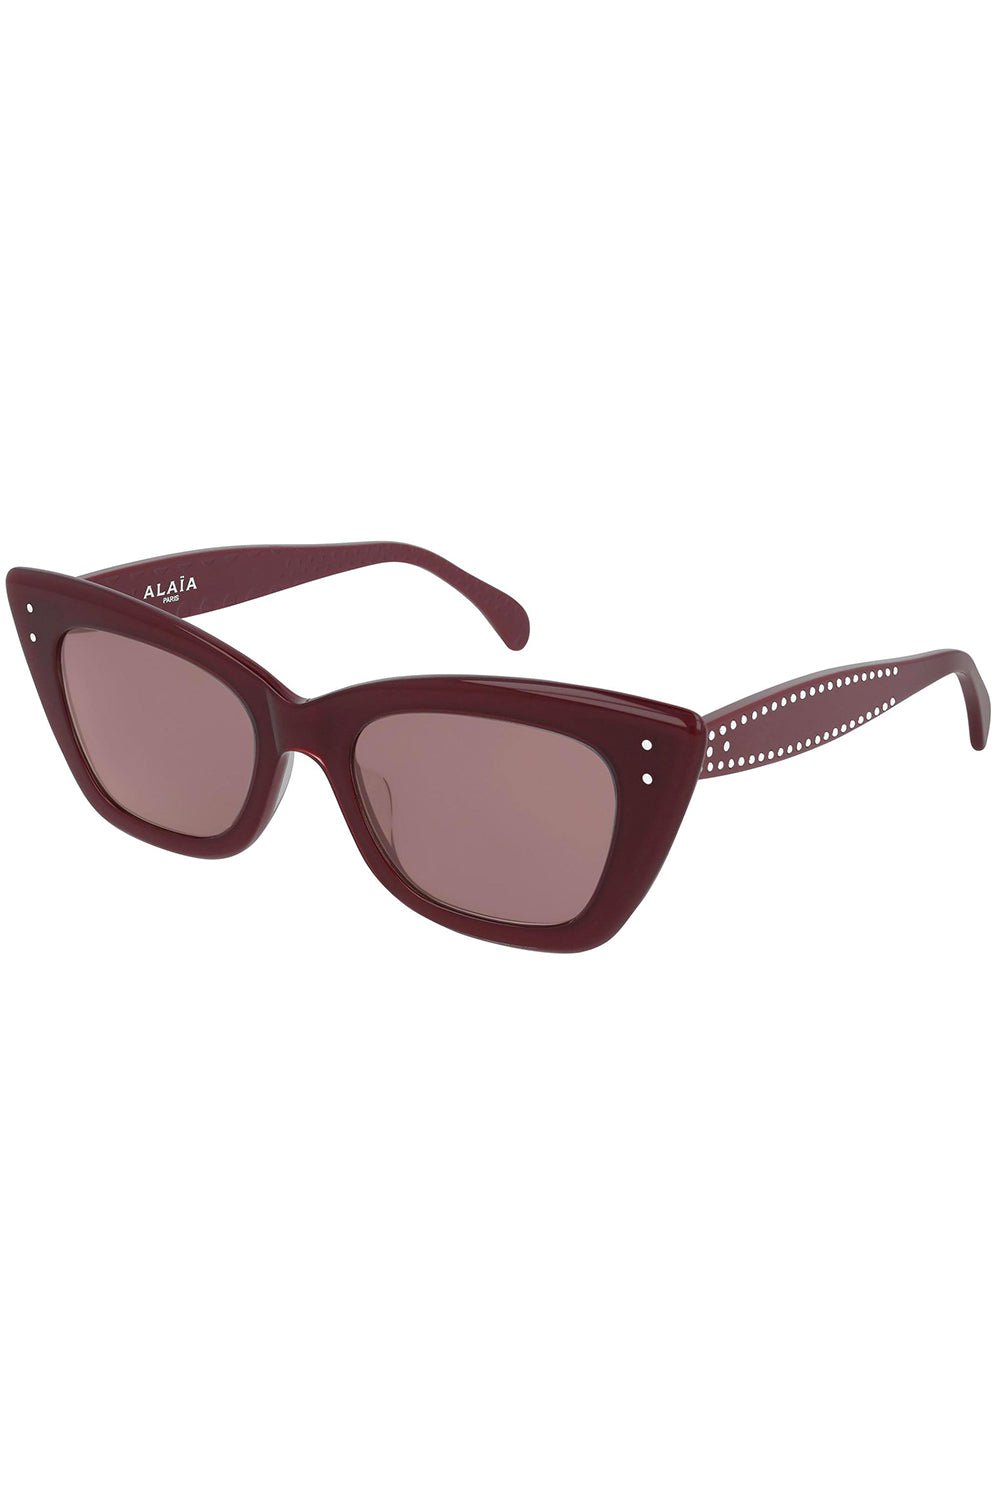 ALAÏA-Rounded Cateye Sunglasses-RED